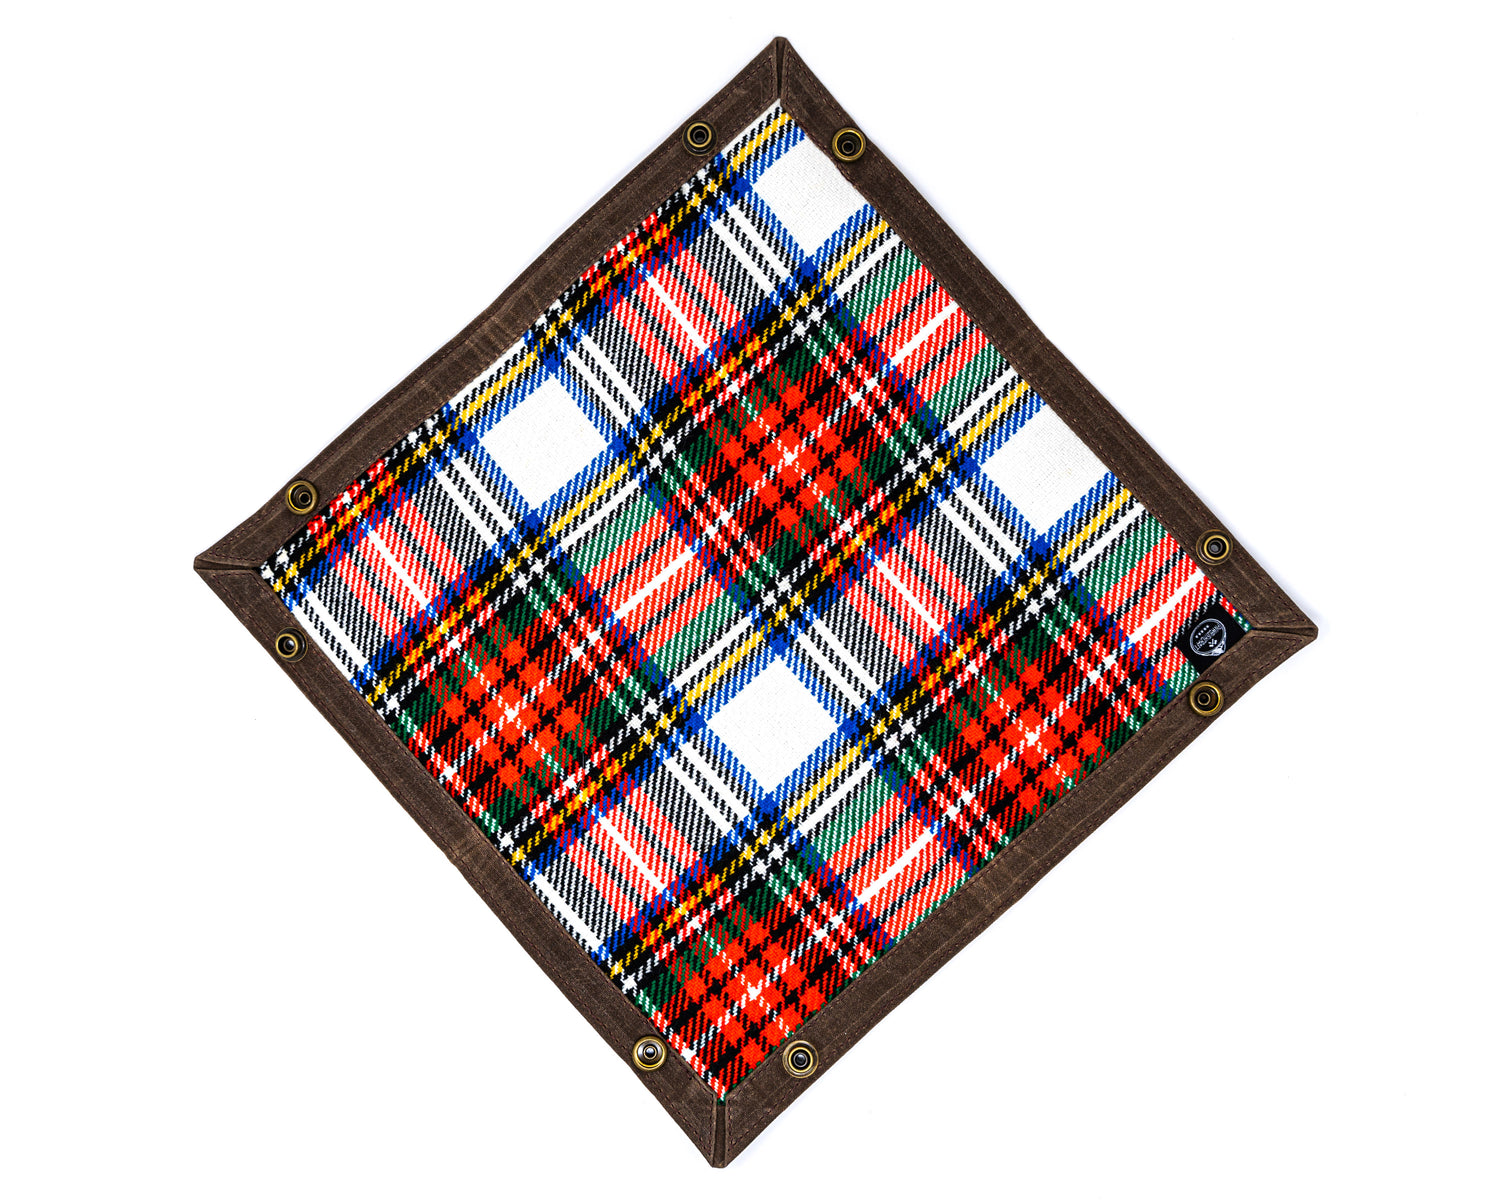 Carry Commission / PNW Bushcraft Vintage Plaid Waxed Canvas Travel Tray overhead view of fully open tray on white background